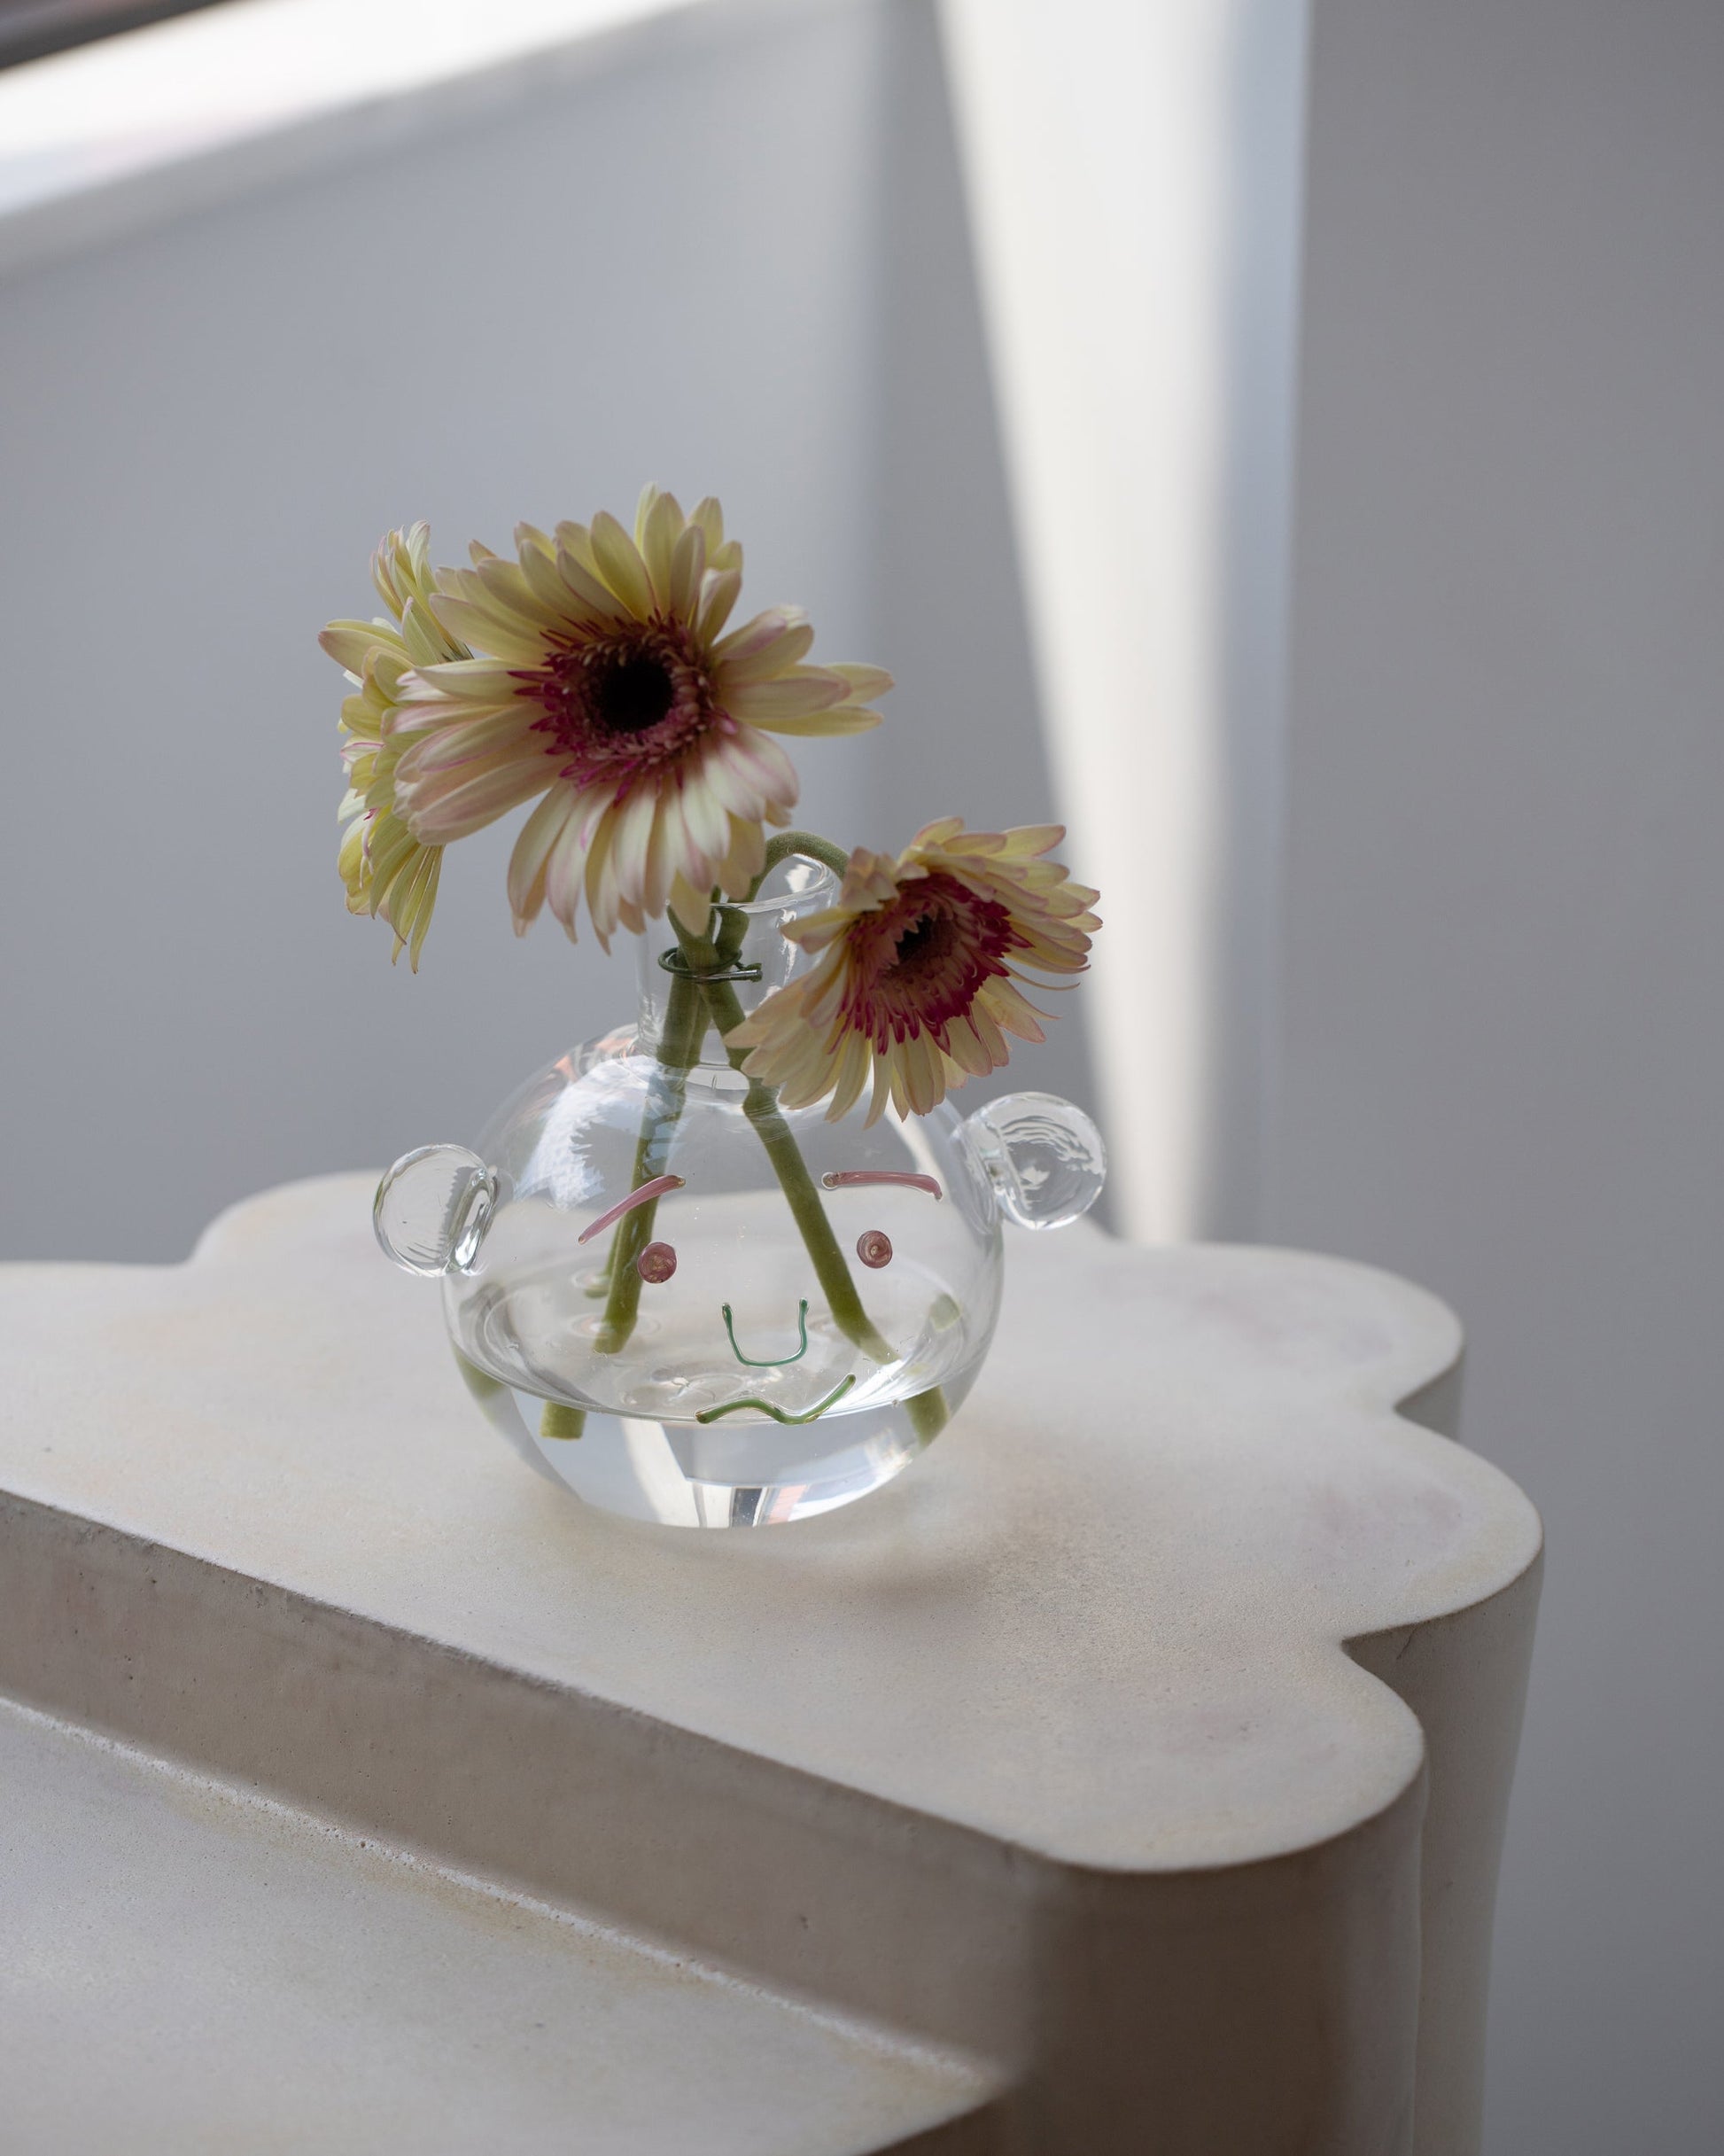 Styled image featuring the TAK TAK Goods Salty Bubble Vase.